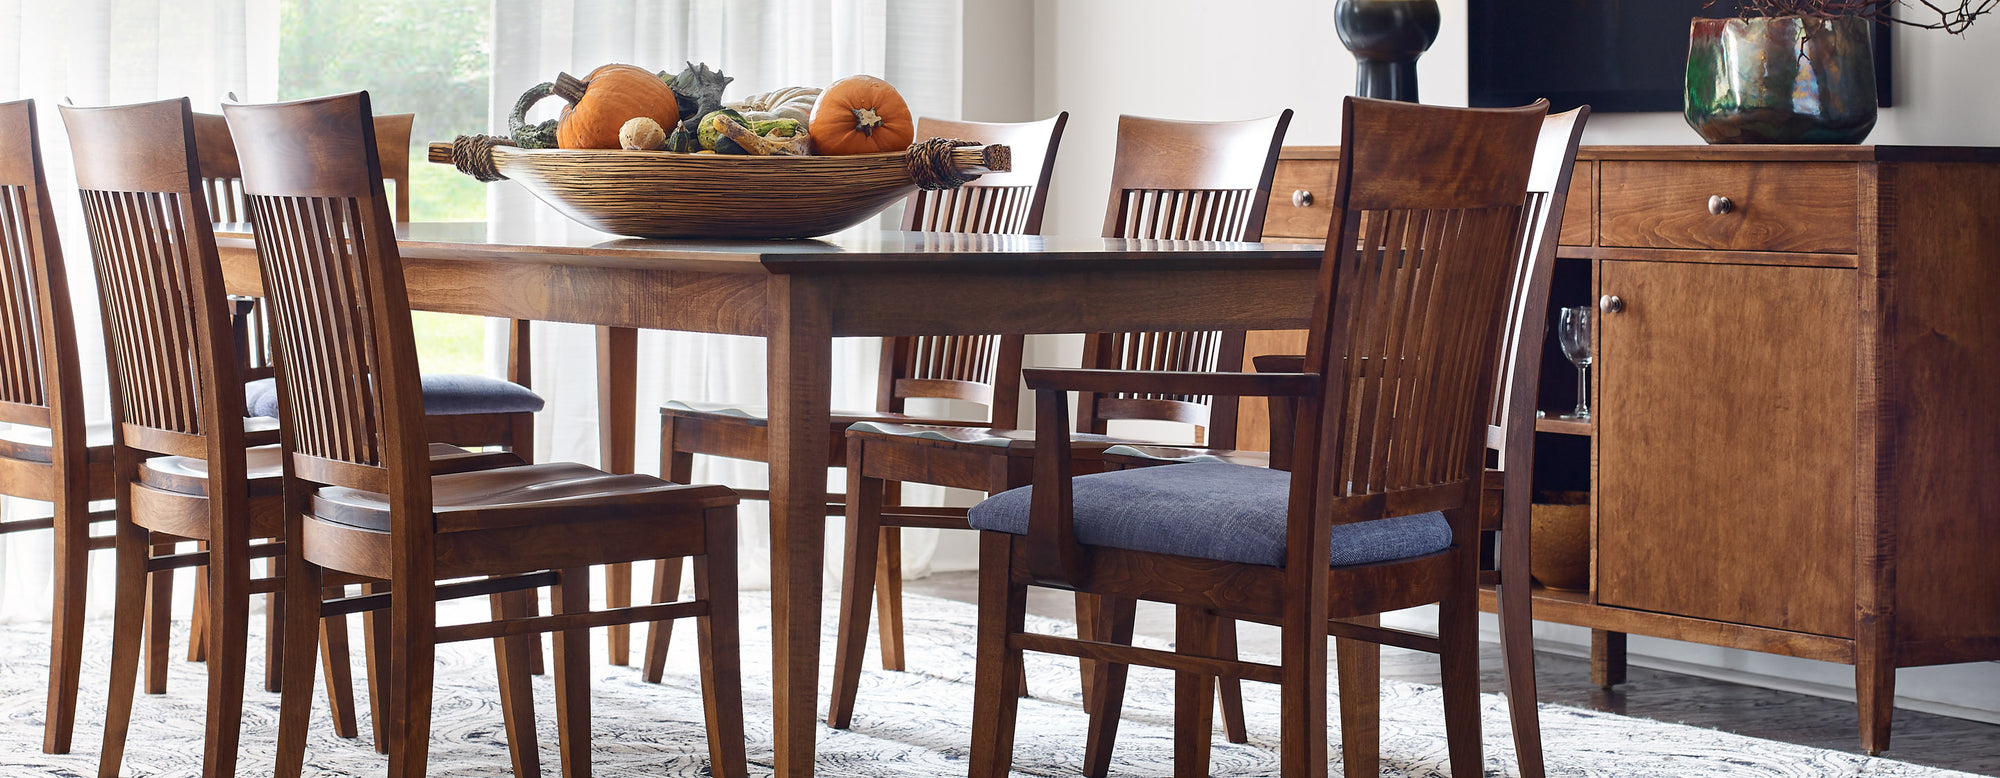 Lifestyle of a Gable Road Dining Table with a large basket full of gourds on top of it. Eight matching chairs surround the table and there is a Gable Road Large Server behind it against a white wall.